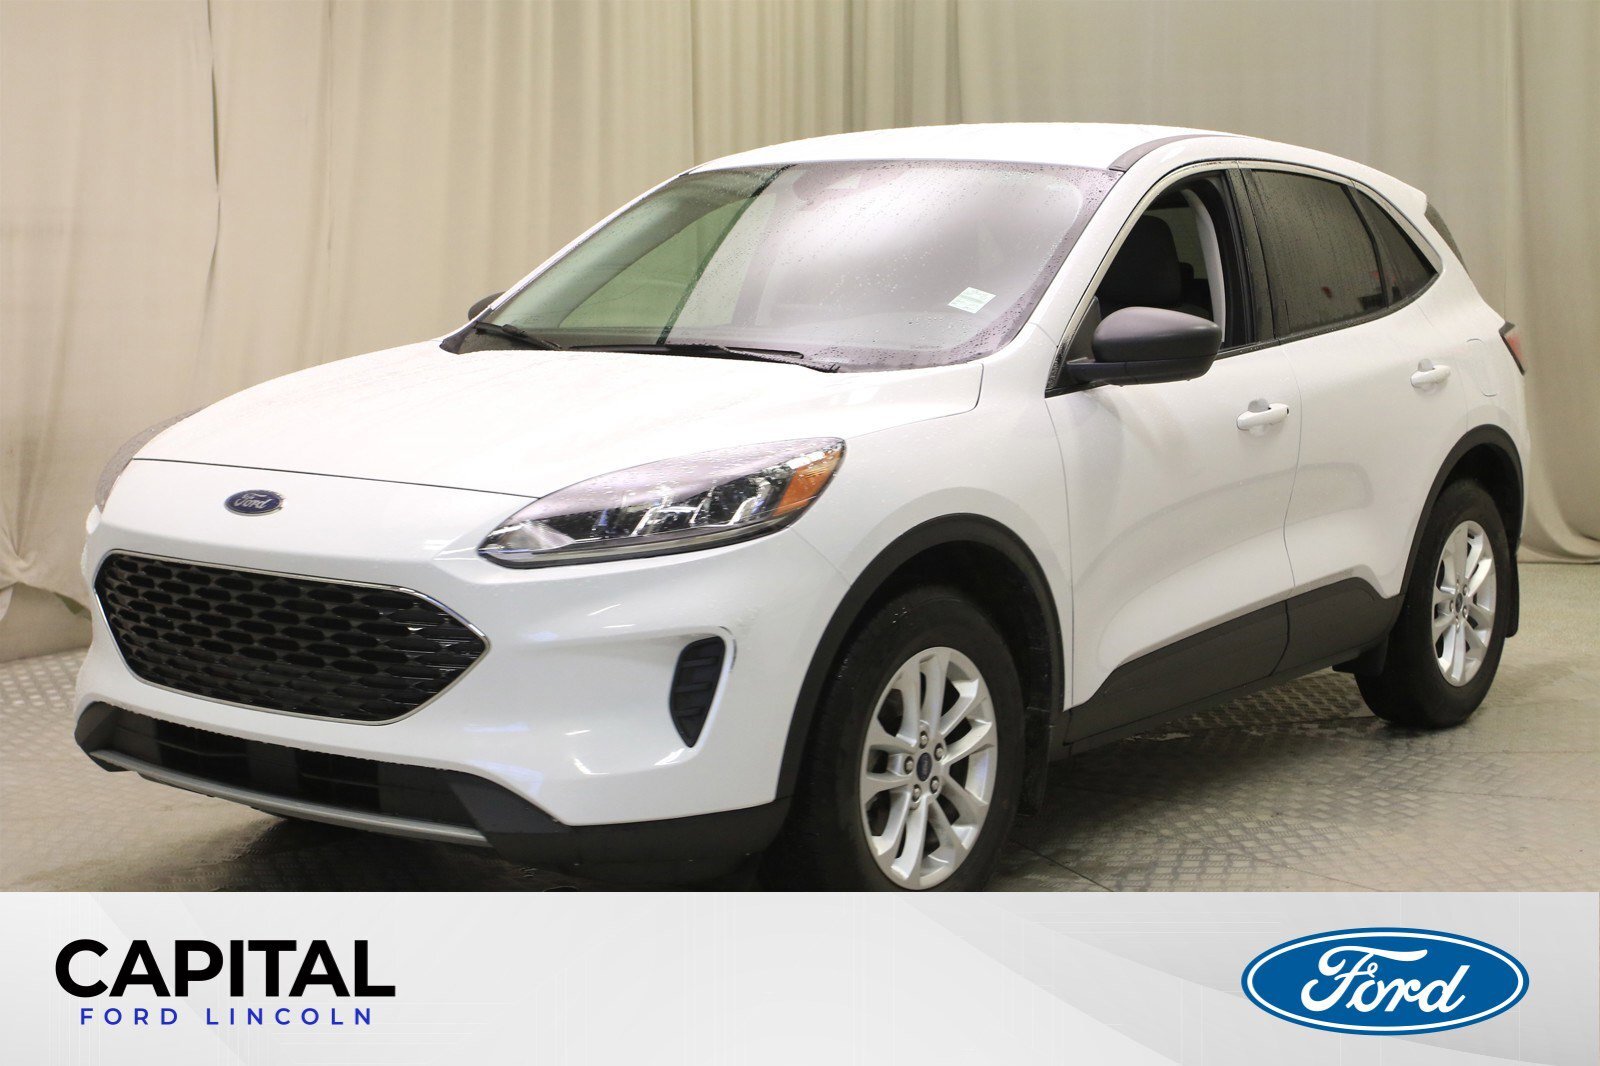 2022 Ford Escape SE AWD **Heated Seats, 1.5L Heated Steering Wheel,